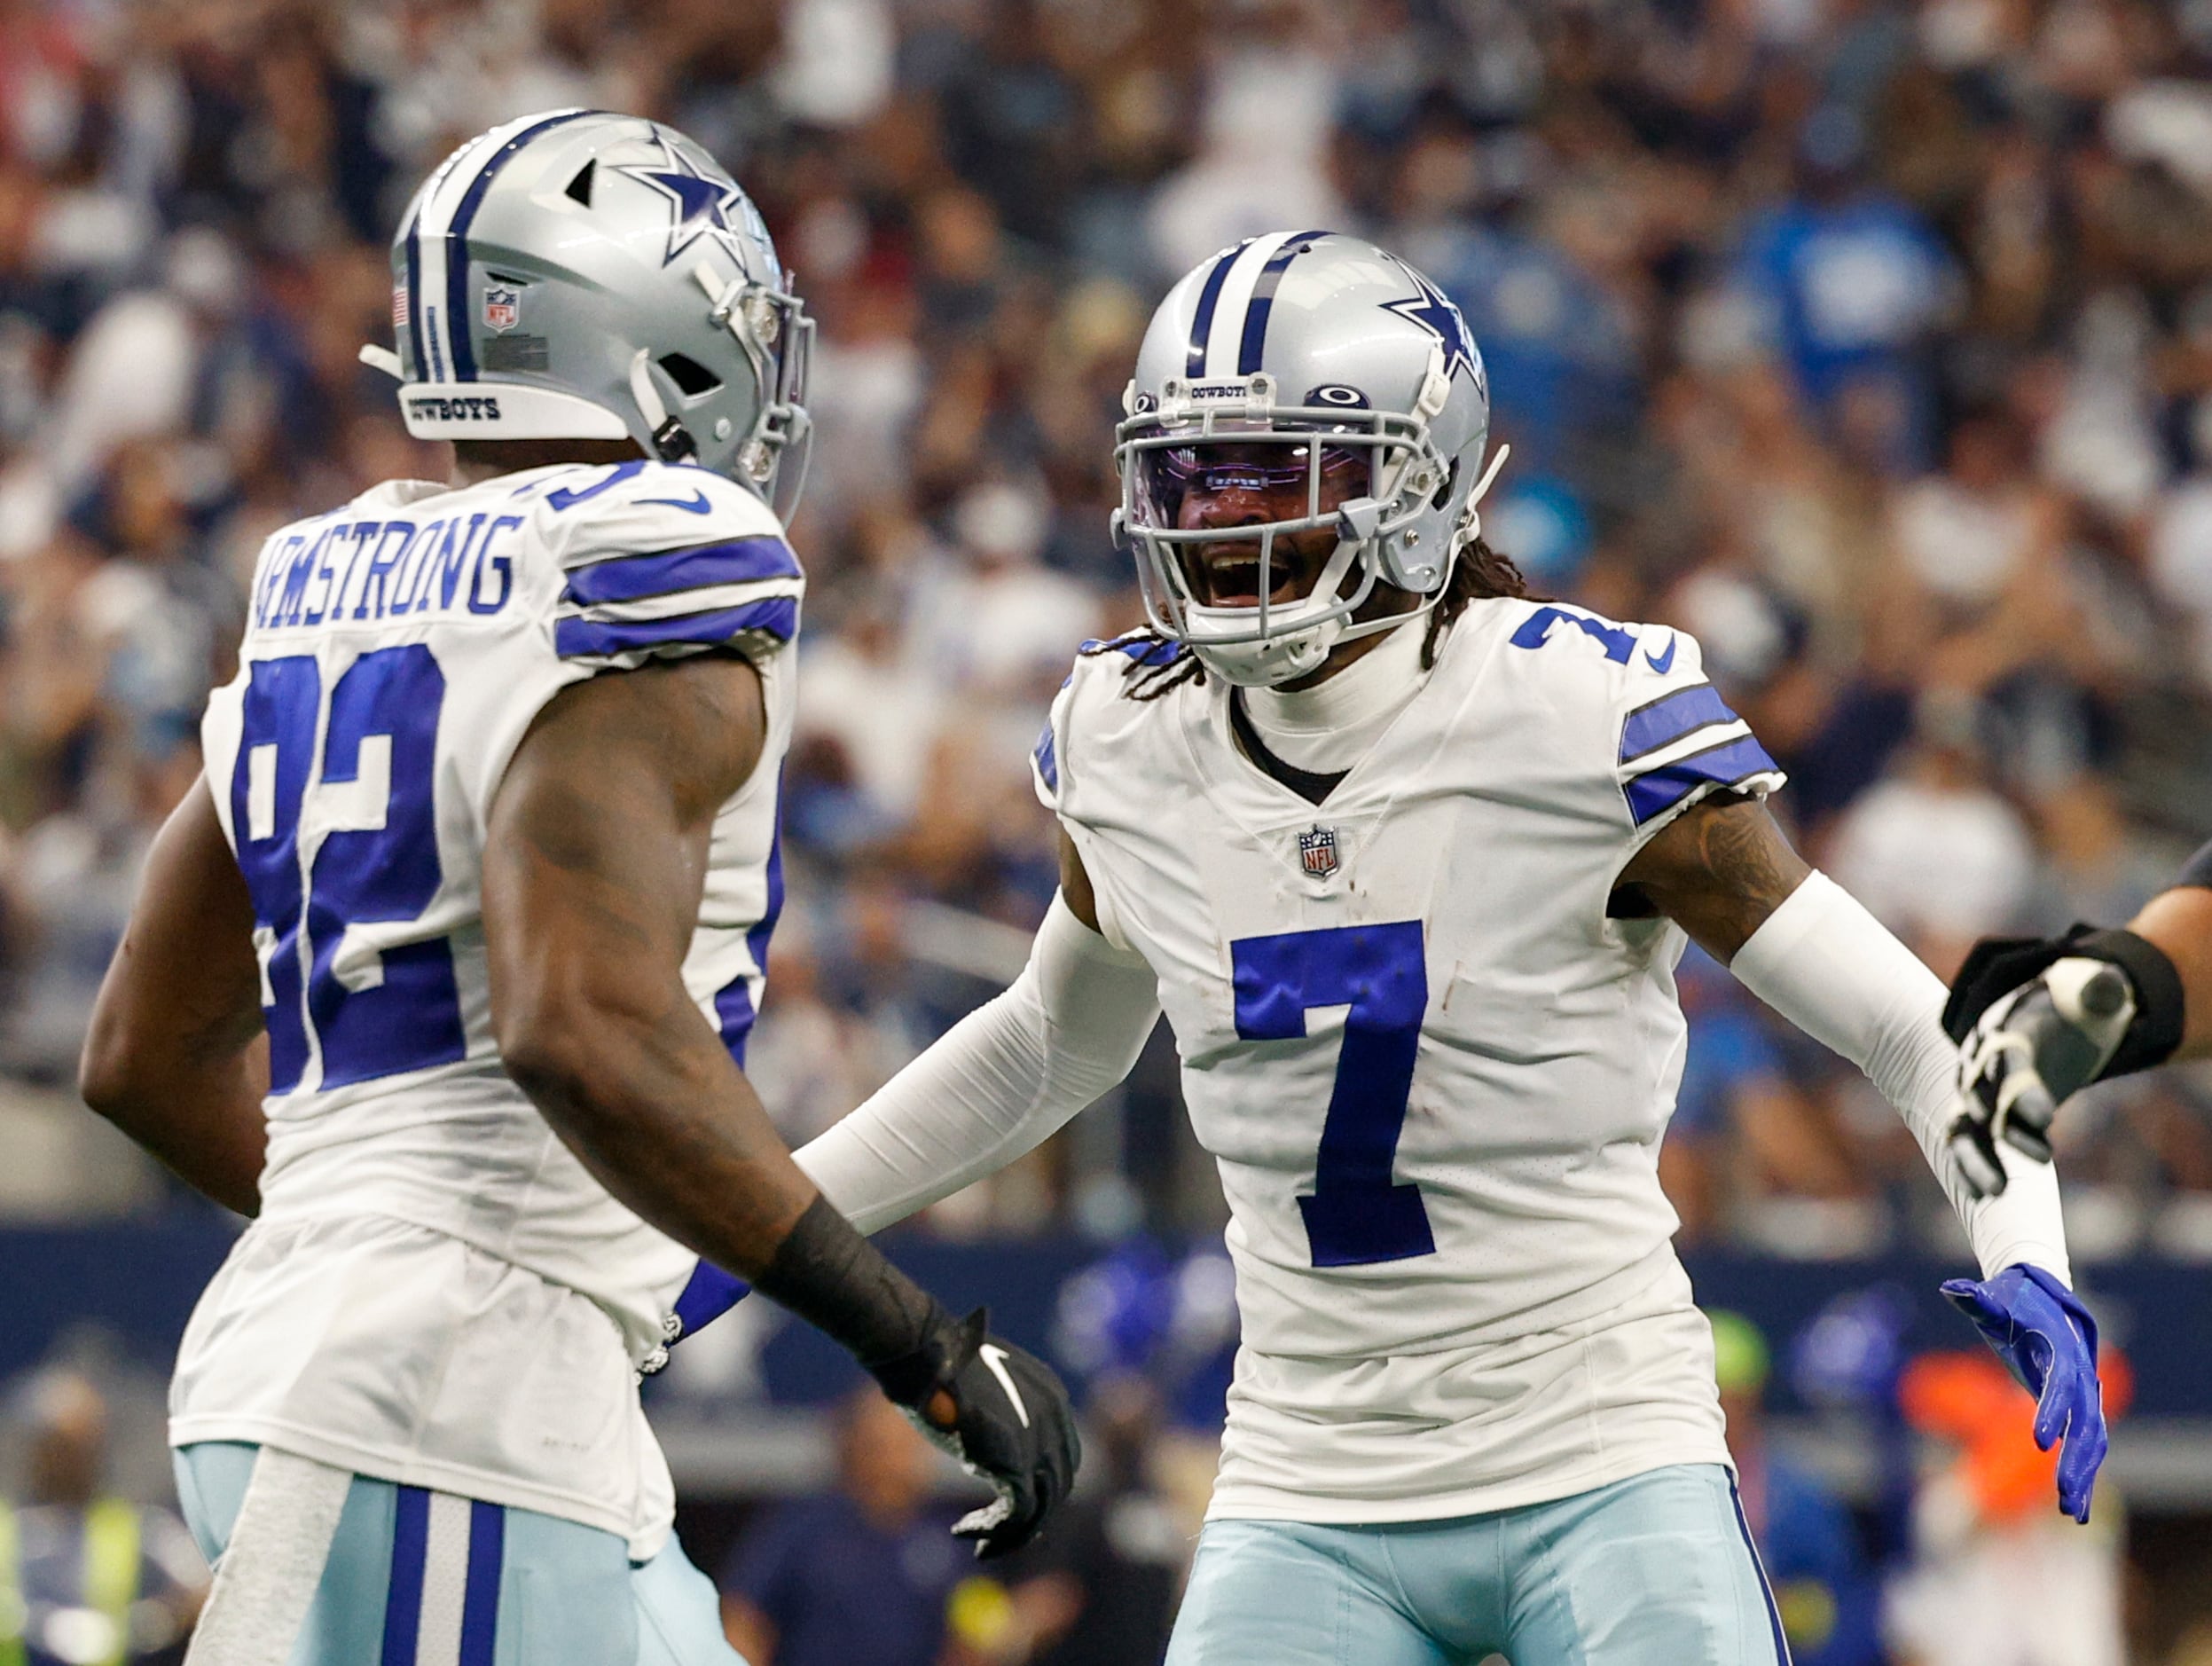 Trevon Diggs signs massive contract extension with the Cowboys